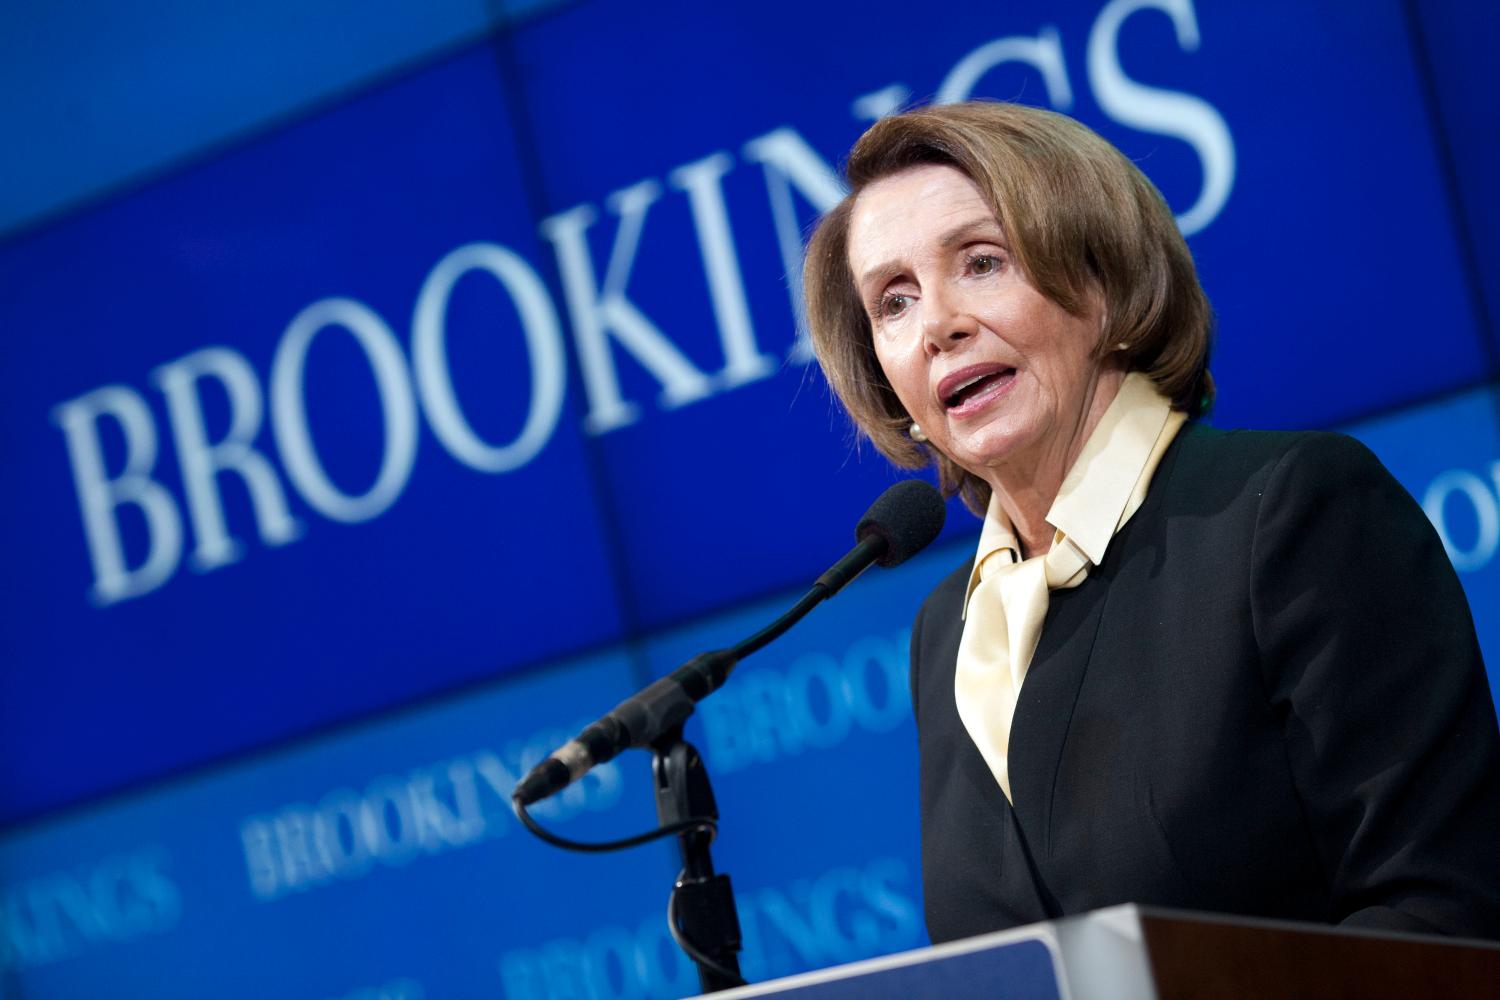 Rep. Nancy Pelosi: Strong Middle Class Is the Bedrock of Our Prosperity